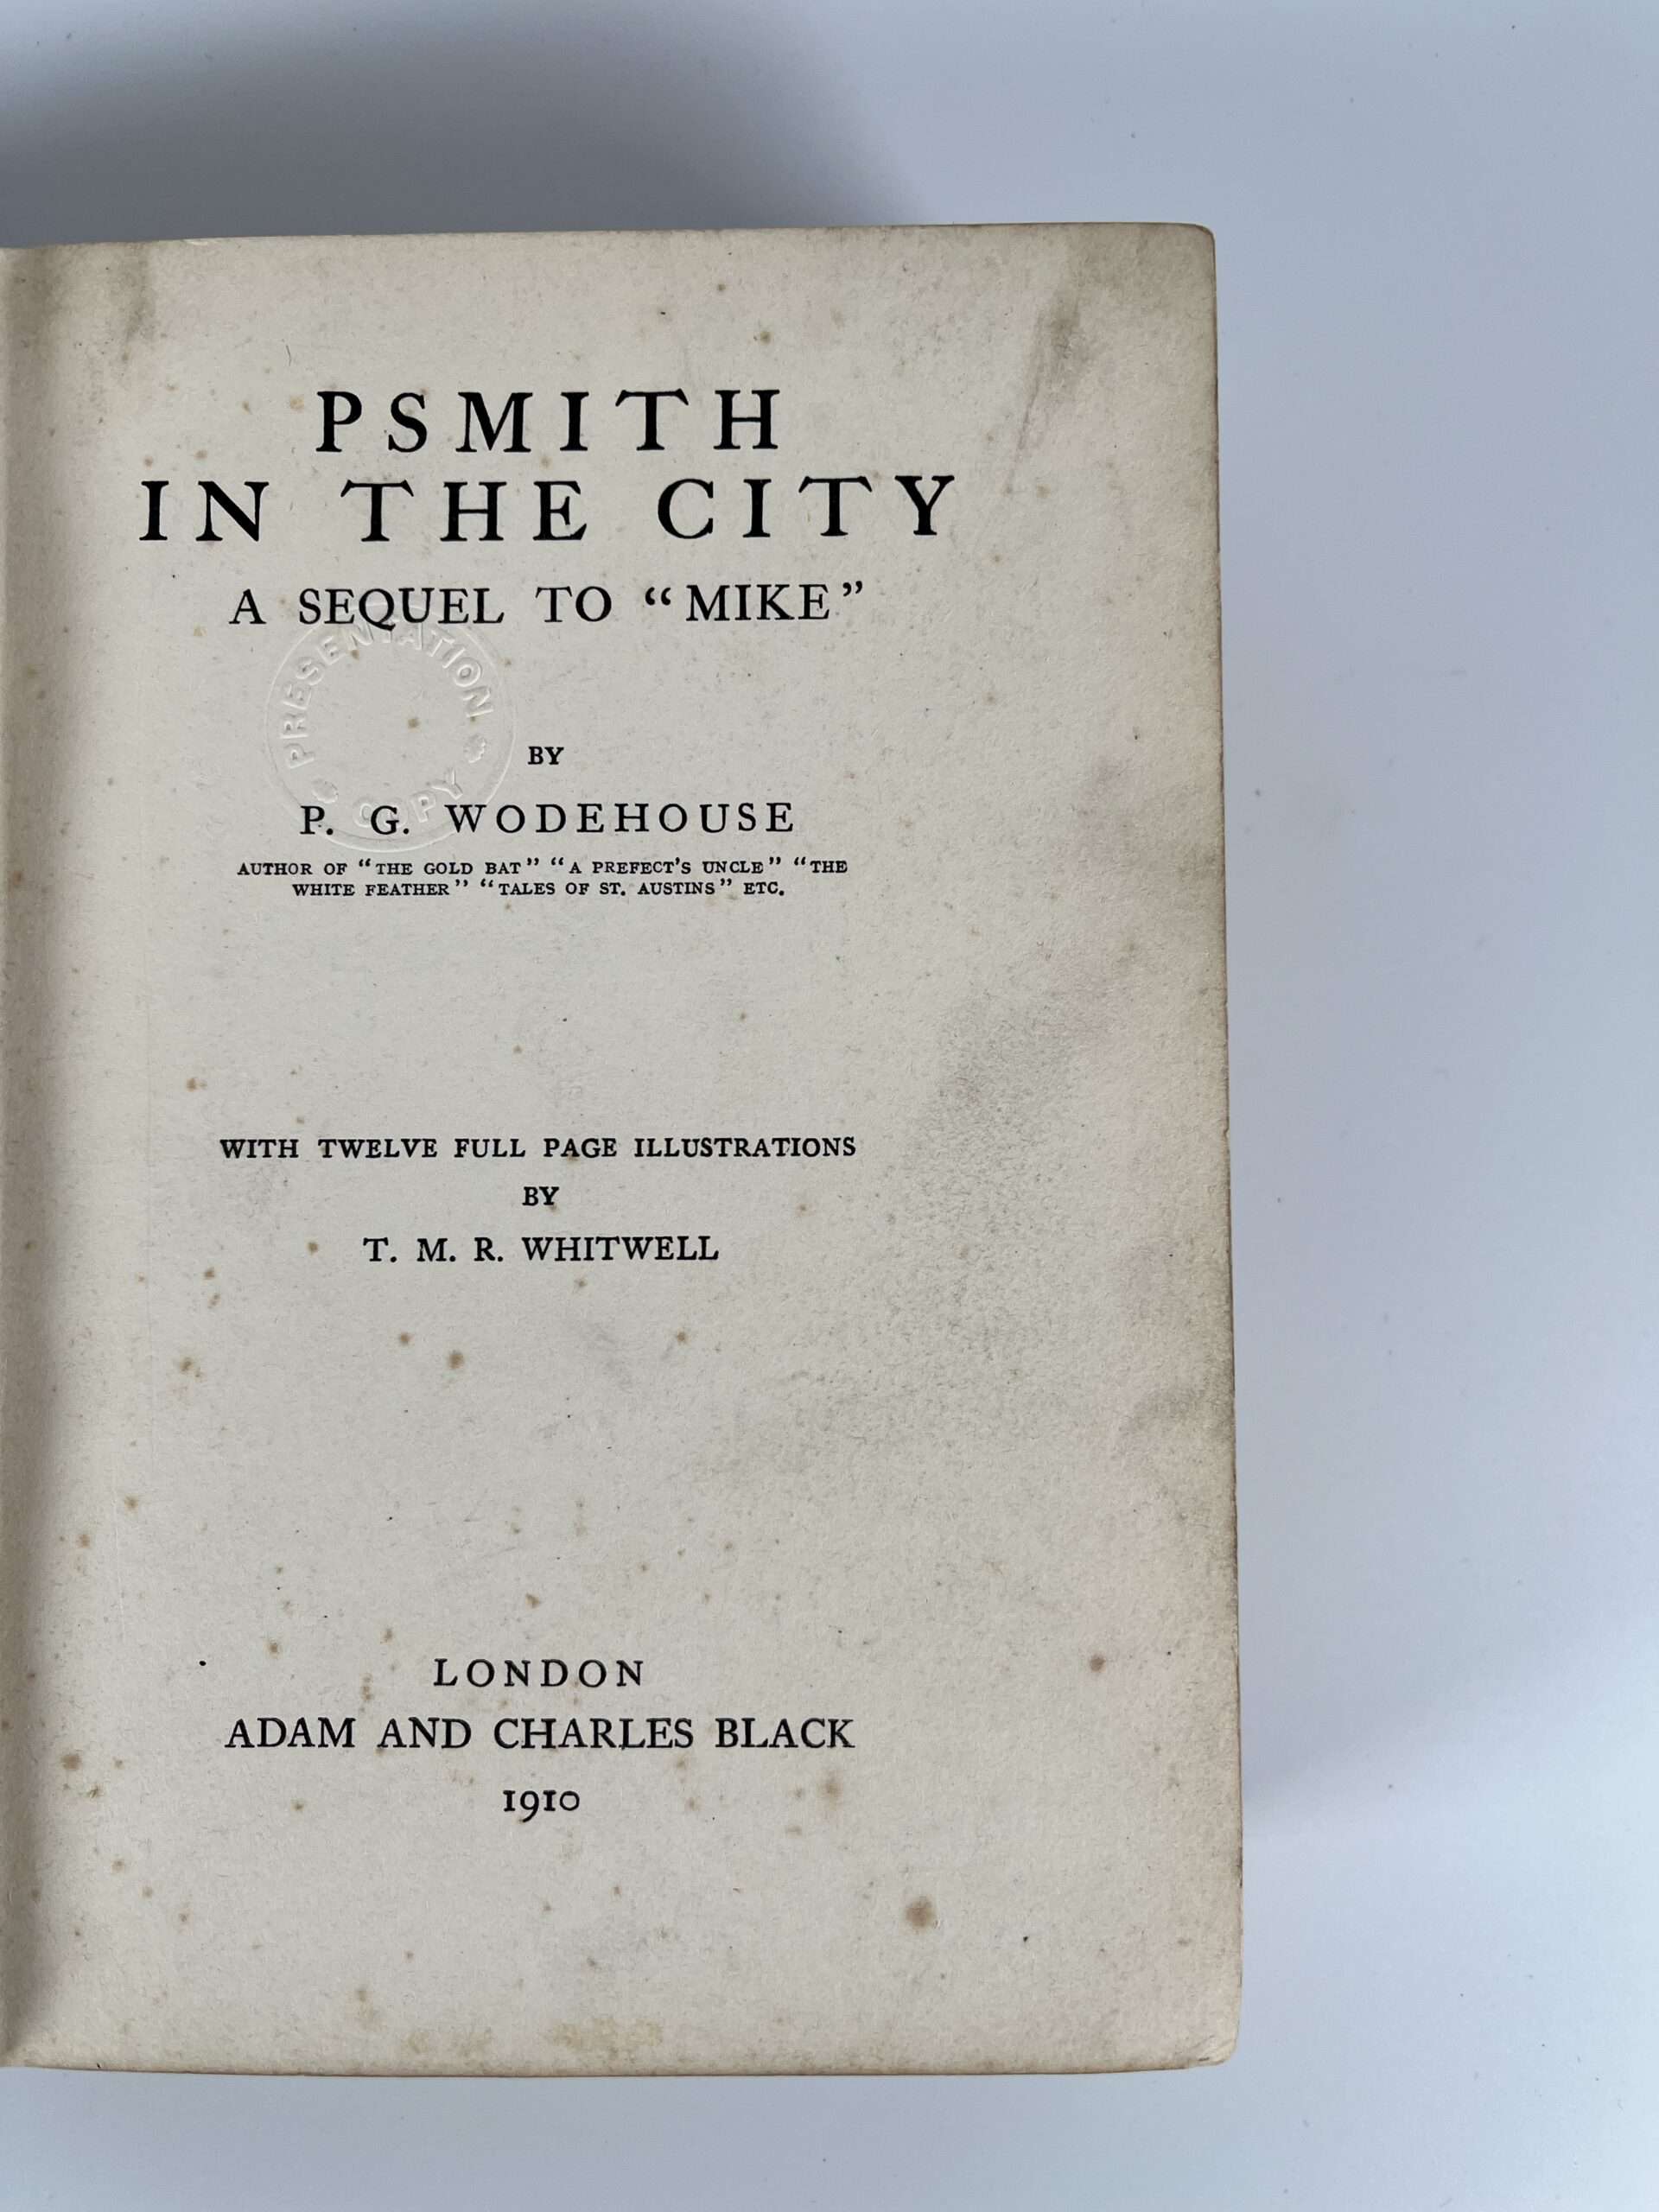 pg wodehouse psmith in the city first edition2